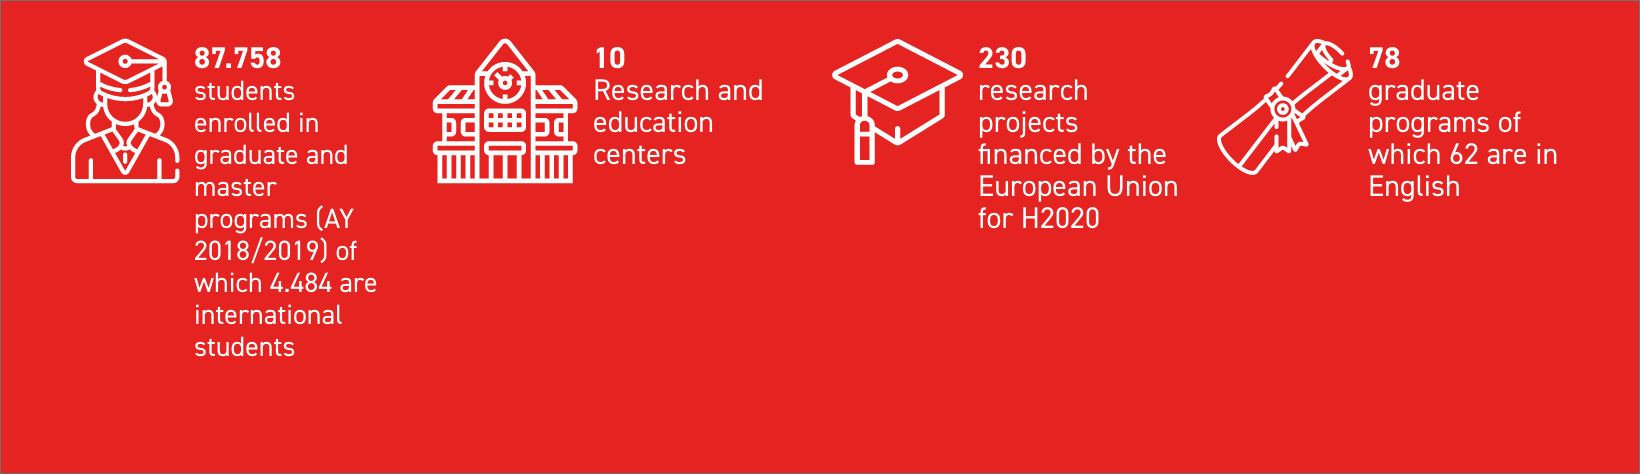 87.758 students enrolled in graduate and master programs (AY 2018/2019) of which 4.484 are international students 10 Research and education centers 230 research projects financed by the European Union for H2020 78 graduate programs of which 62 are in Engl